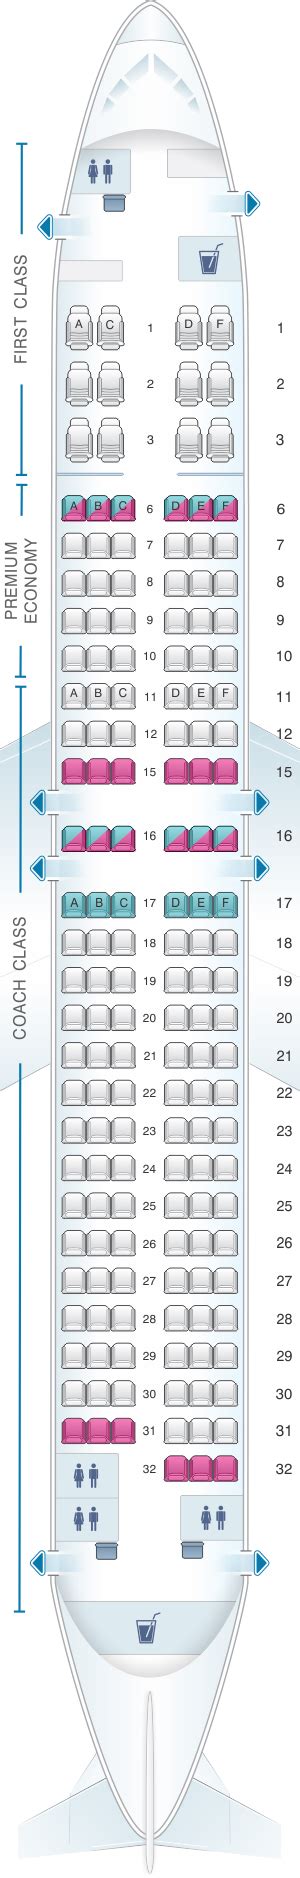 Alaska Airlines Seating Chart Airbus A Two Birds Home